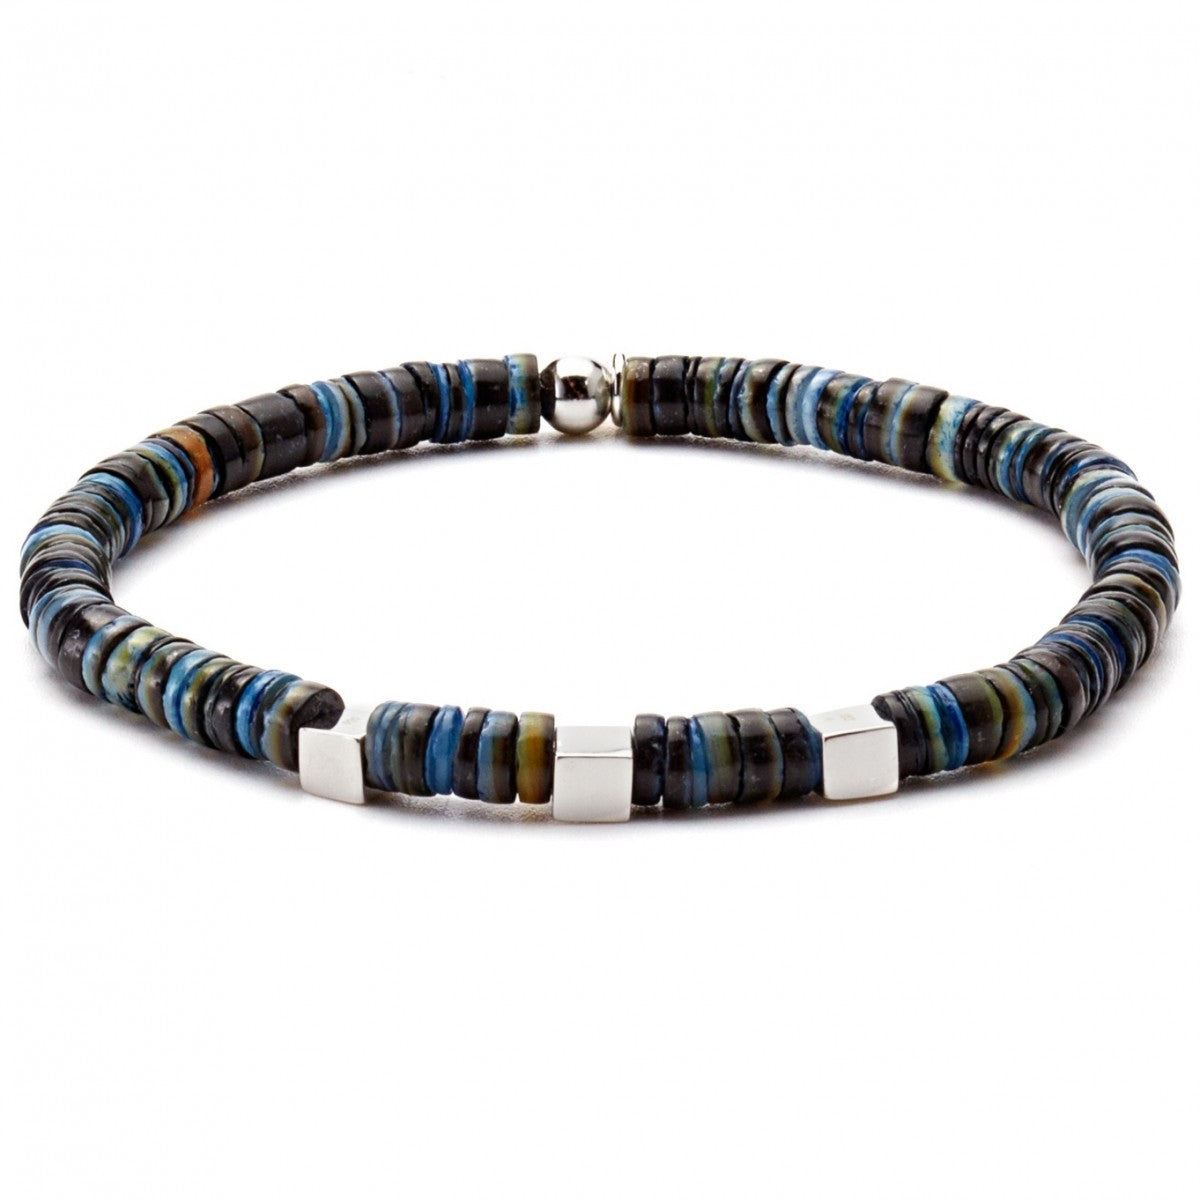 Tateossian Thinly Sliced Shells with Rhodium Plated Silver Cubes Bracelet, Blue, Black and Brown